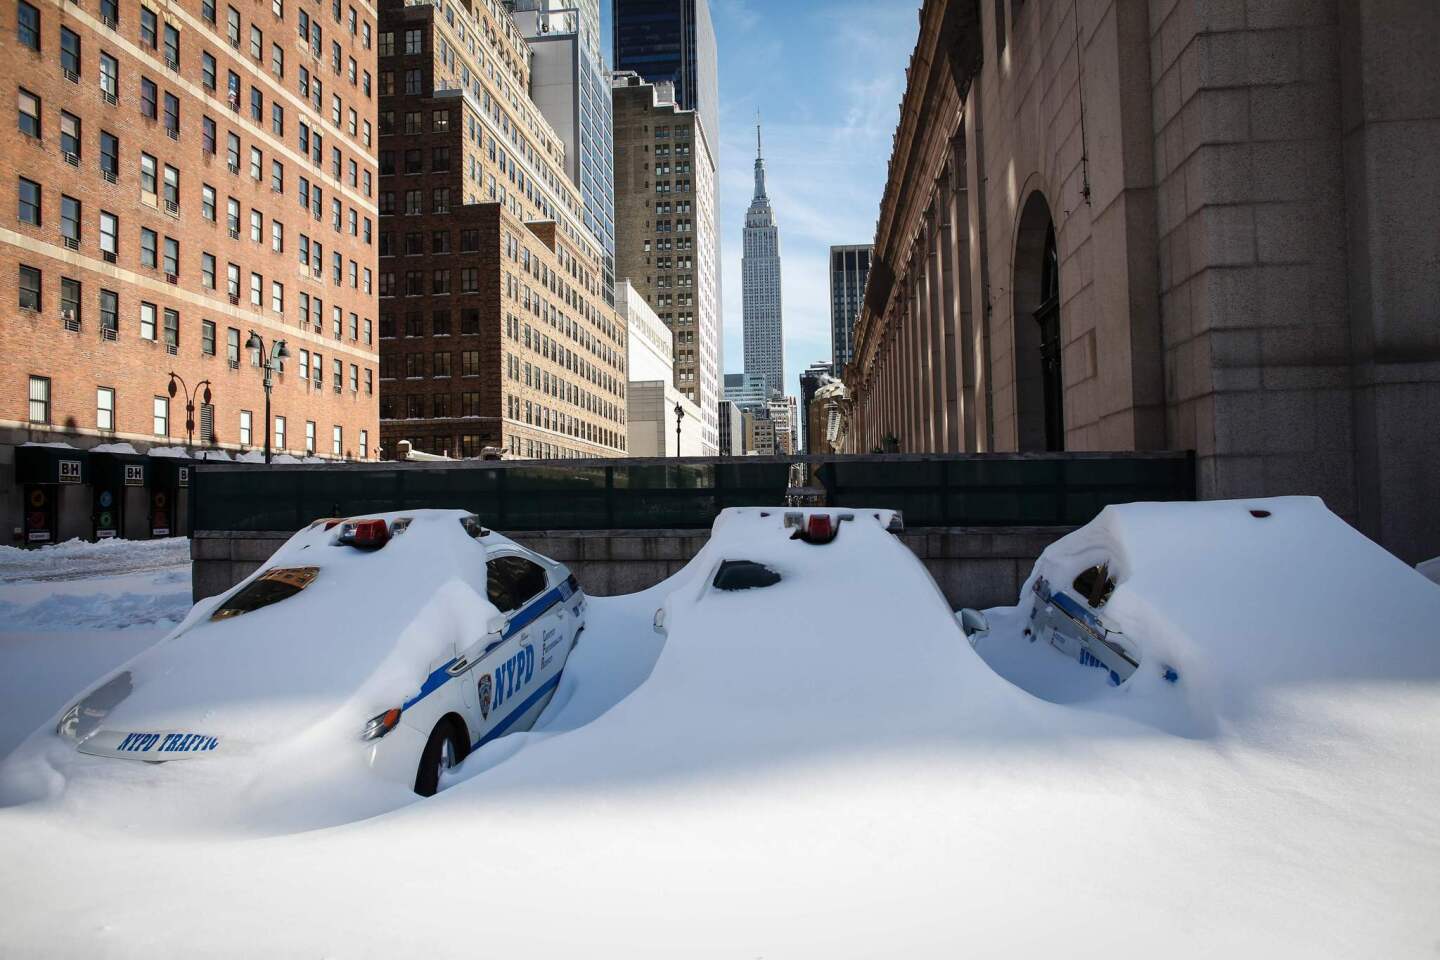 NYPD cars covered in snow are seen in New York. Millions of people in the eastern United States started digging out from a huge blizzard that brought New York and Washington to a standstill, but the travel woes were far from over.